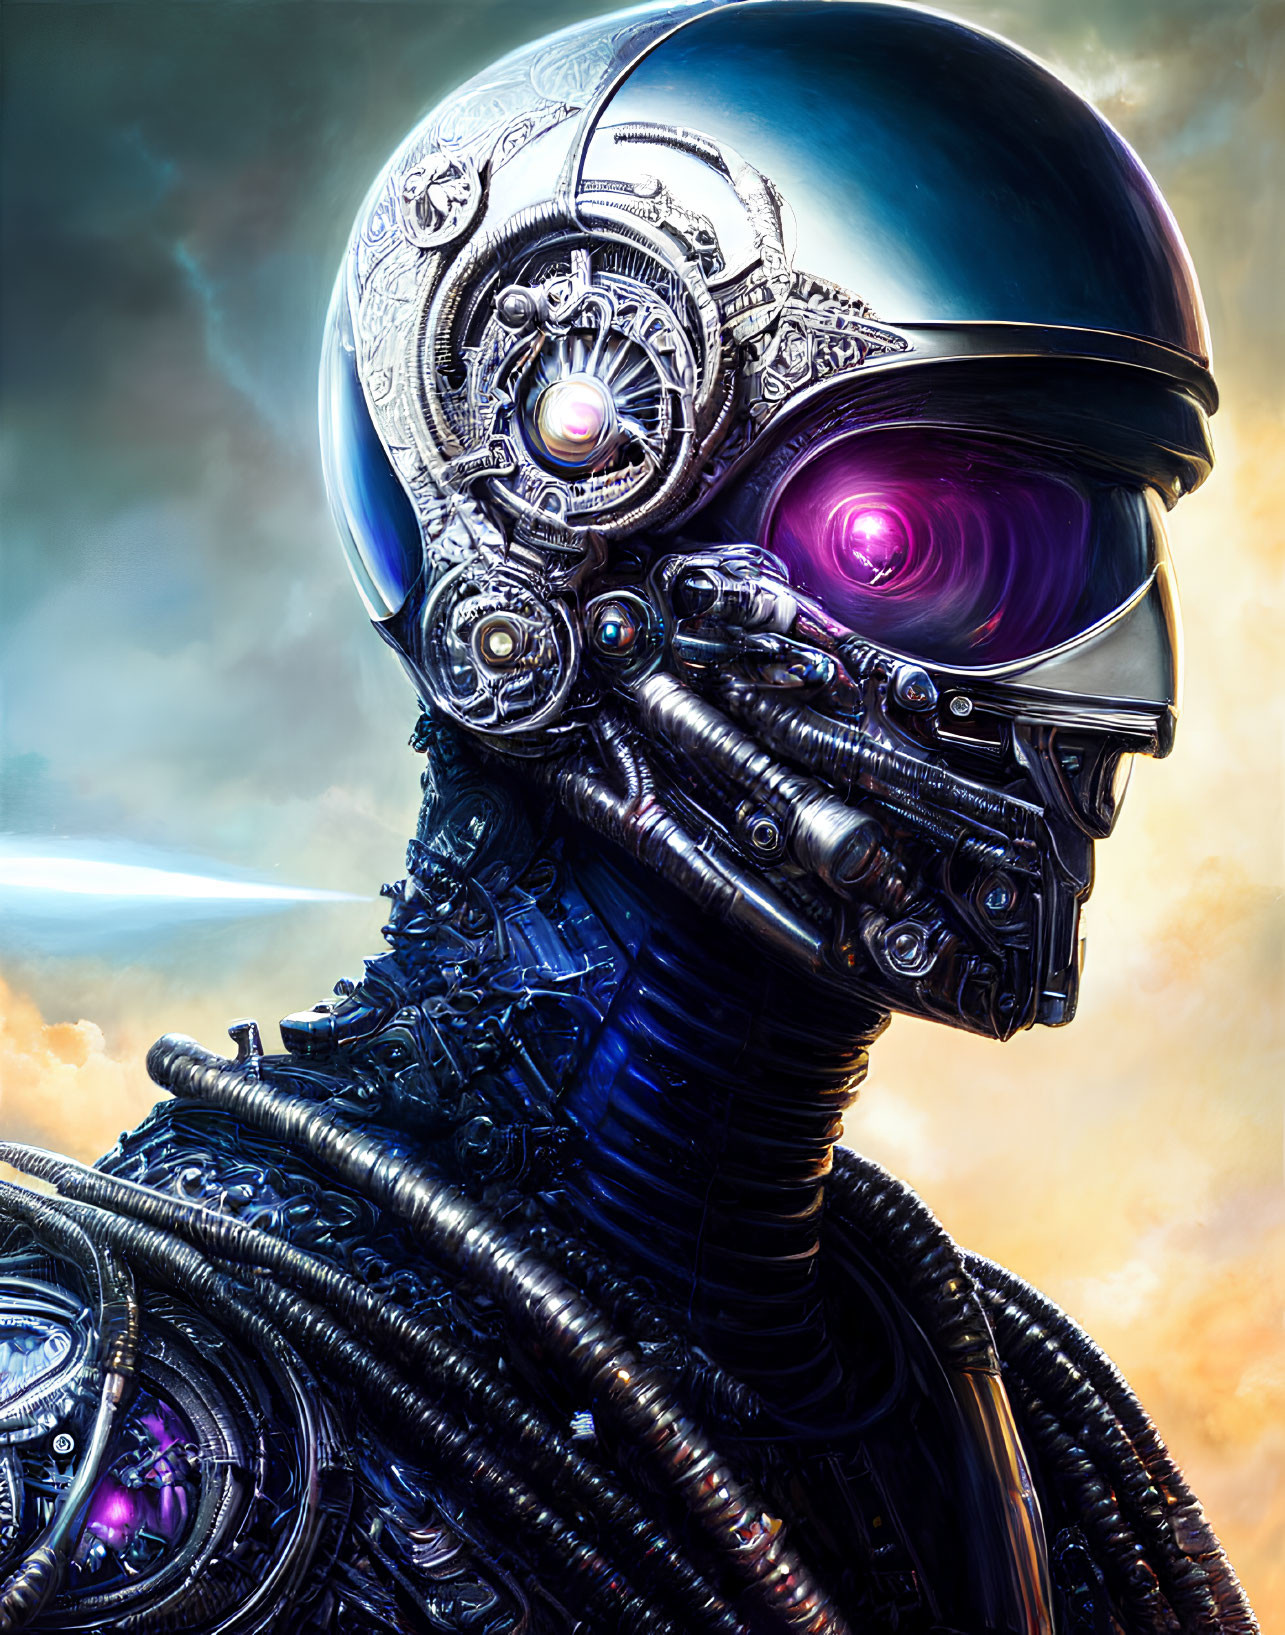 Detailed metallic skull with glowing purple eyes against dramatic sky